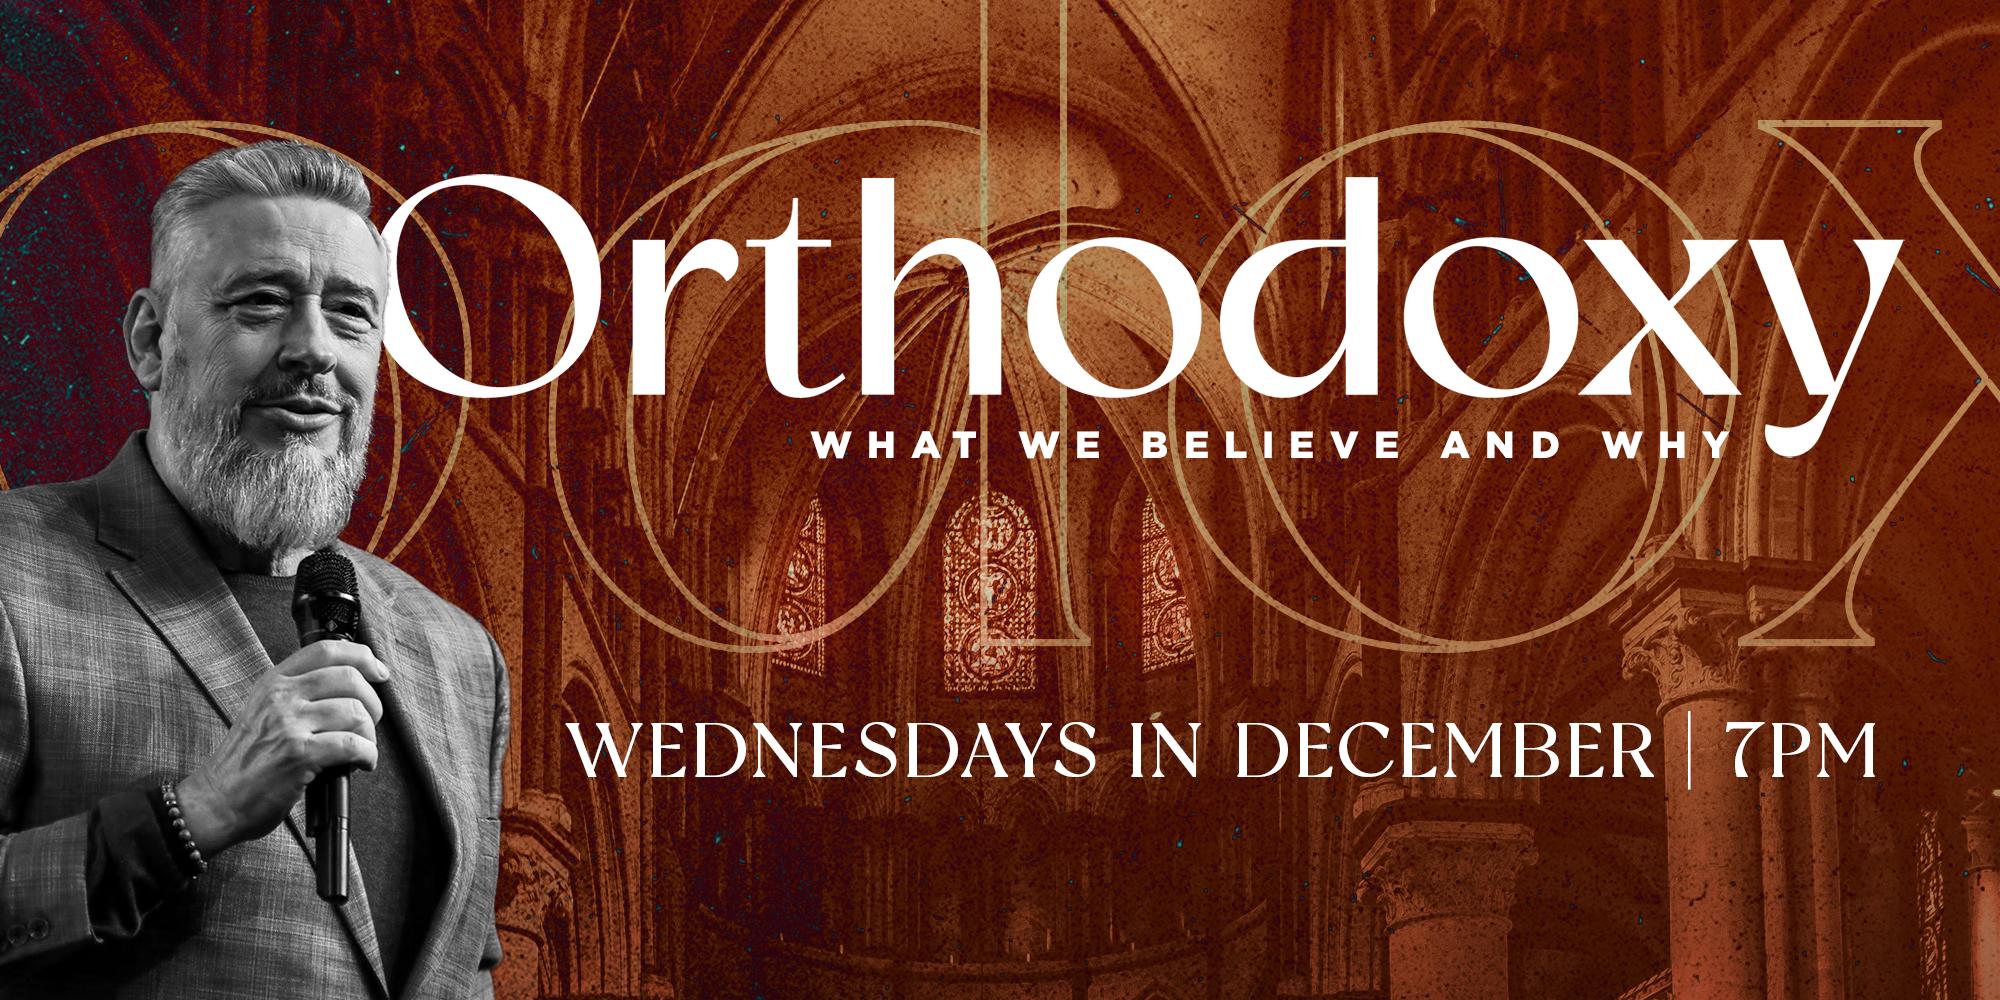 Orthodoxy - What We Believe And Why - Wednesdays In December At 7pm